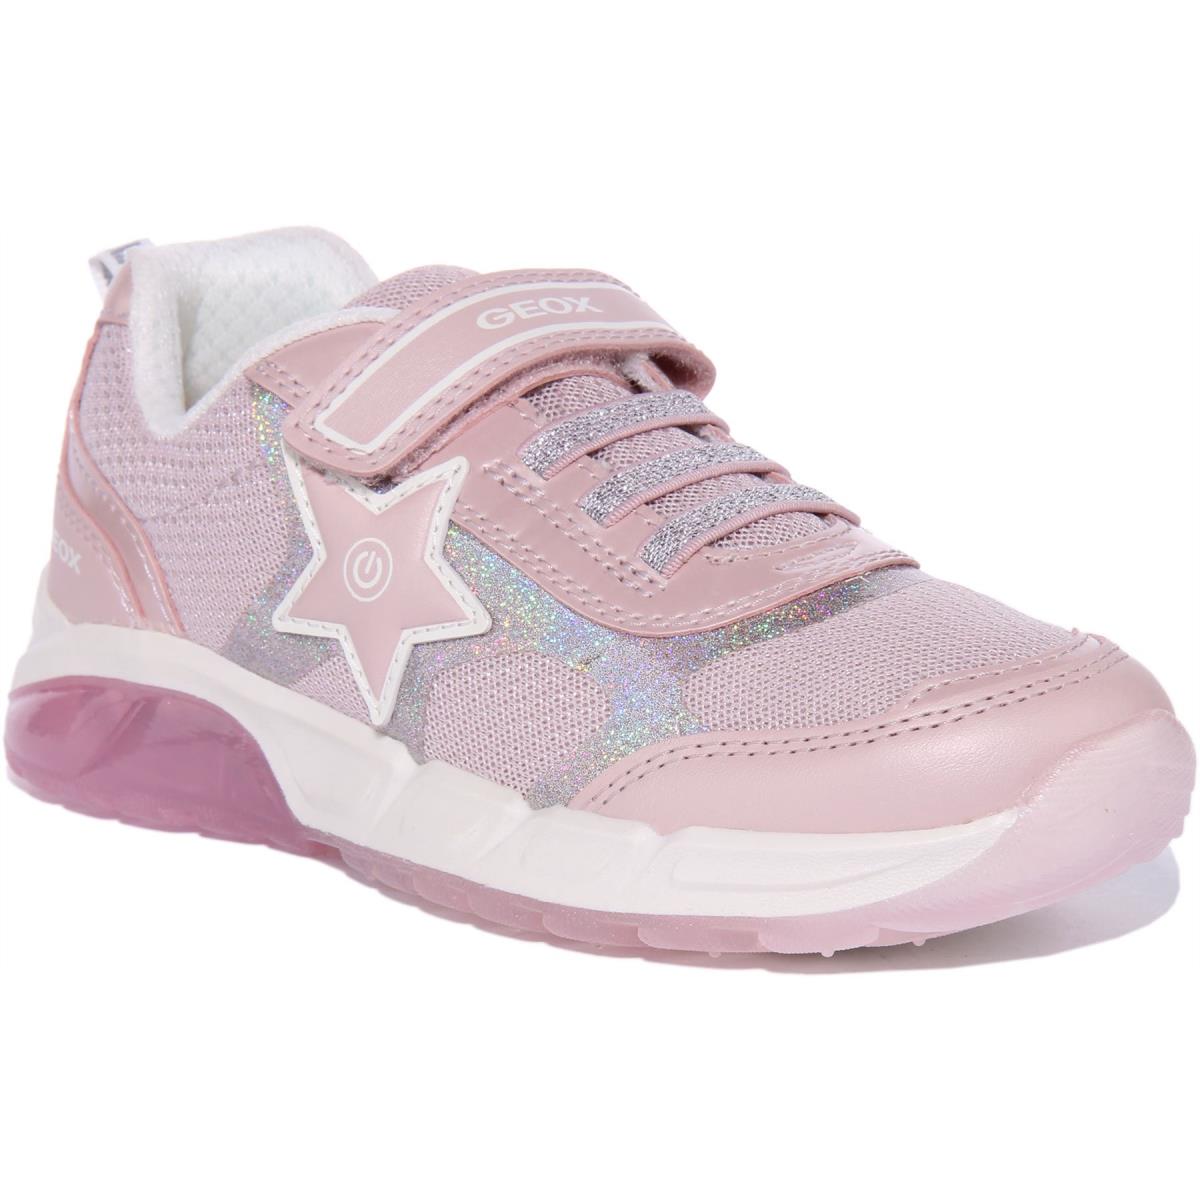 Geox J Spaziale Girls Single Strap Light Up Sneakers In Pink Size US 1C - 4Y PINK